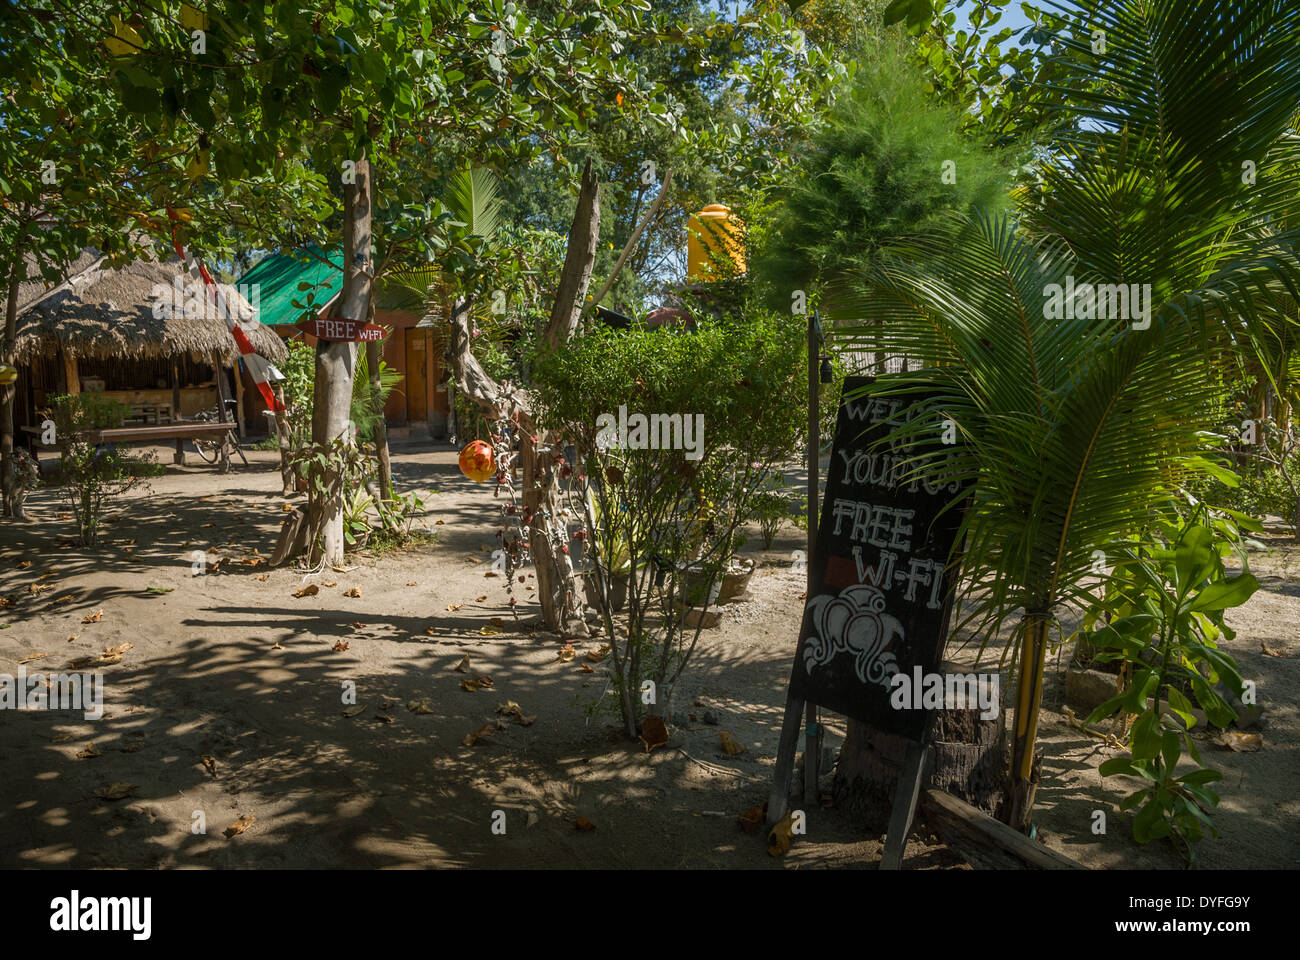 Locals bars restaurant with trees on the beach with free wi-fi Nusa Lembongan Thailand Stock Photo